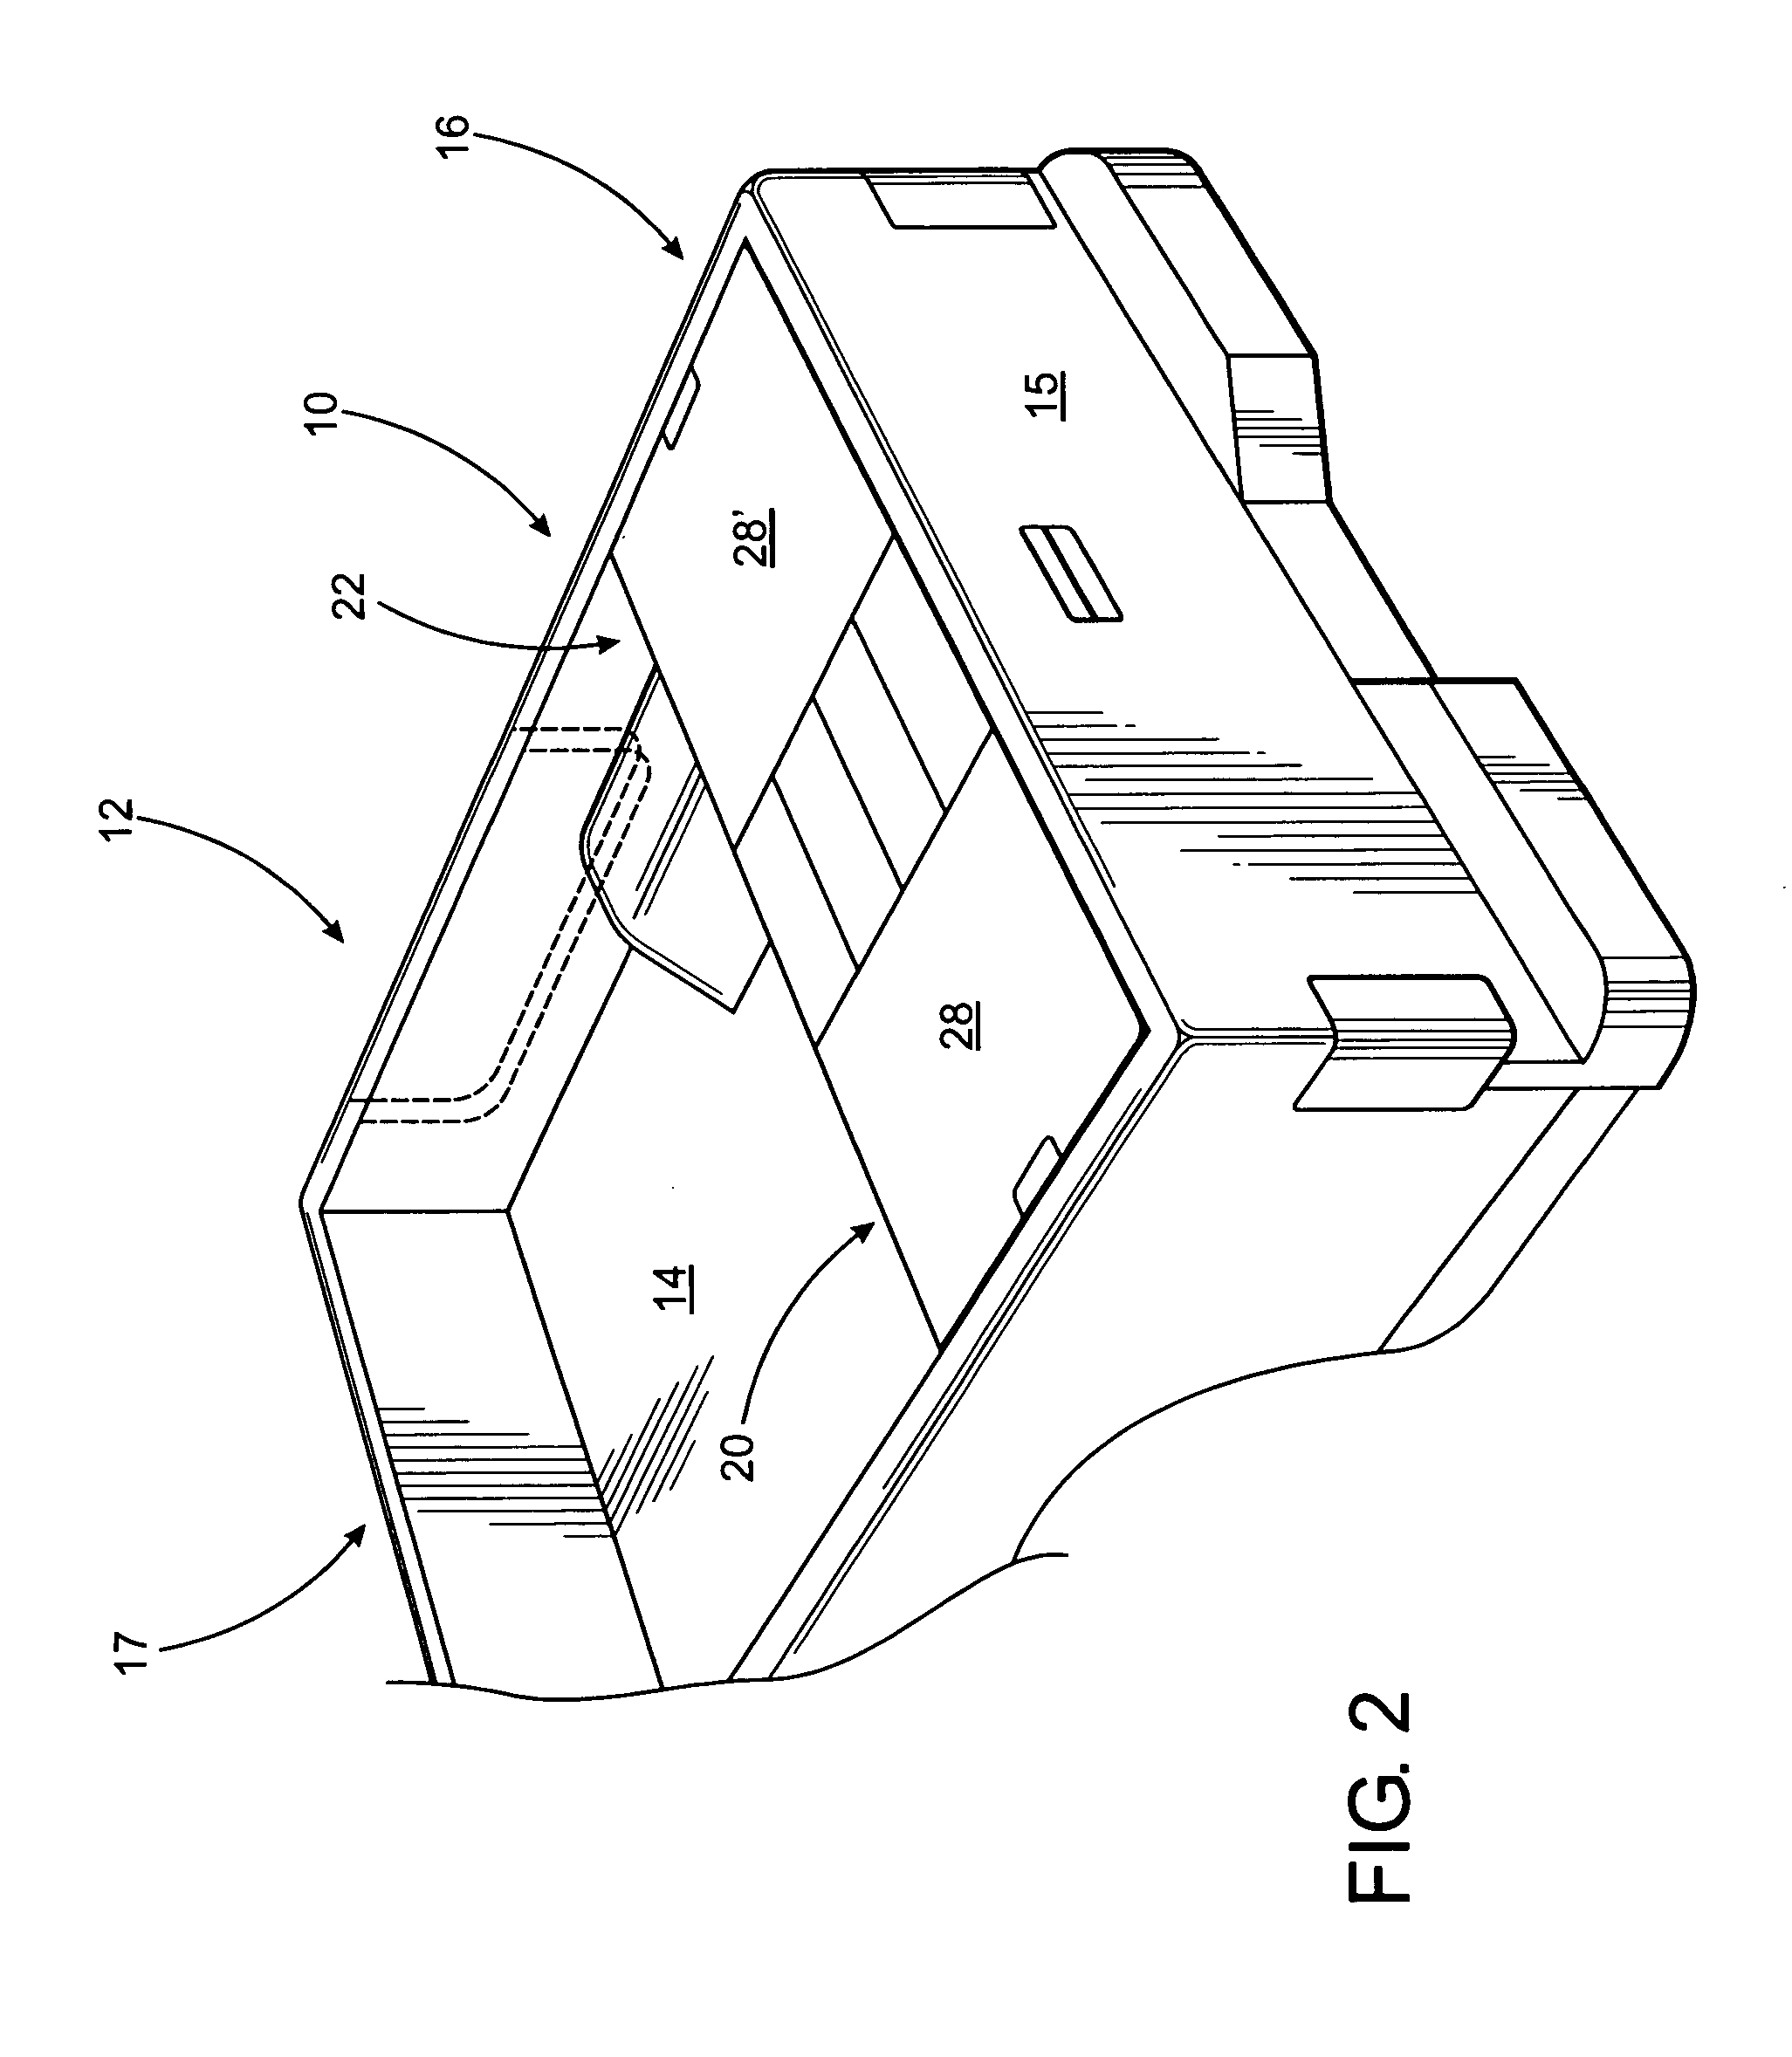 Airflow deflector assembly